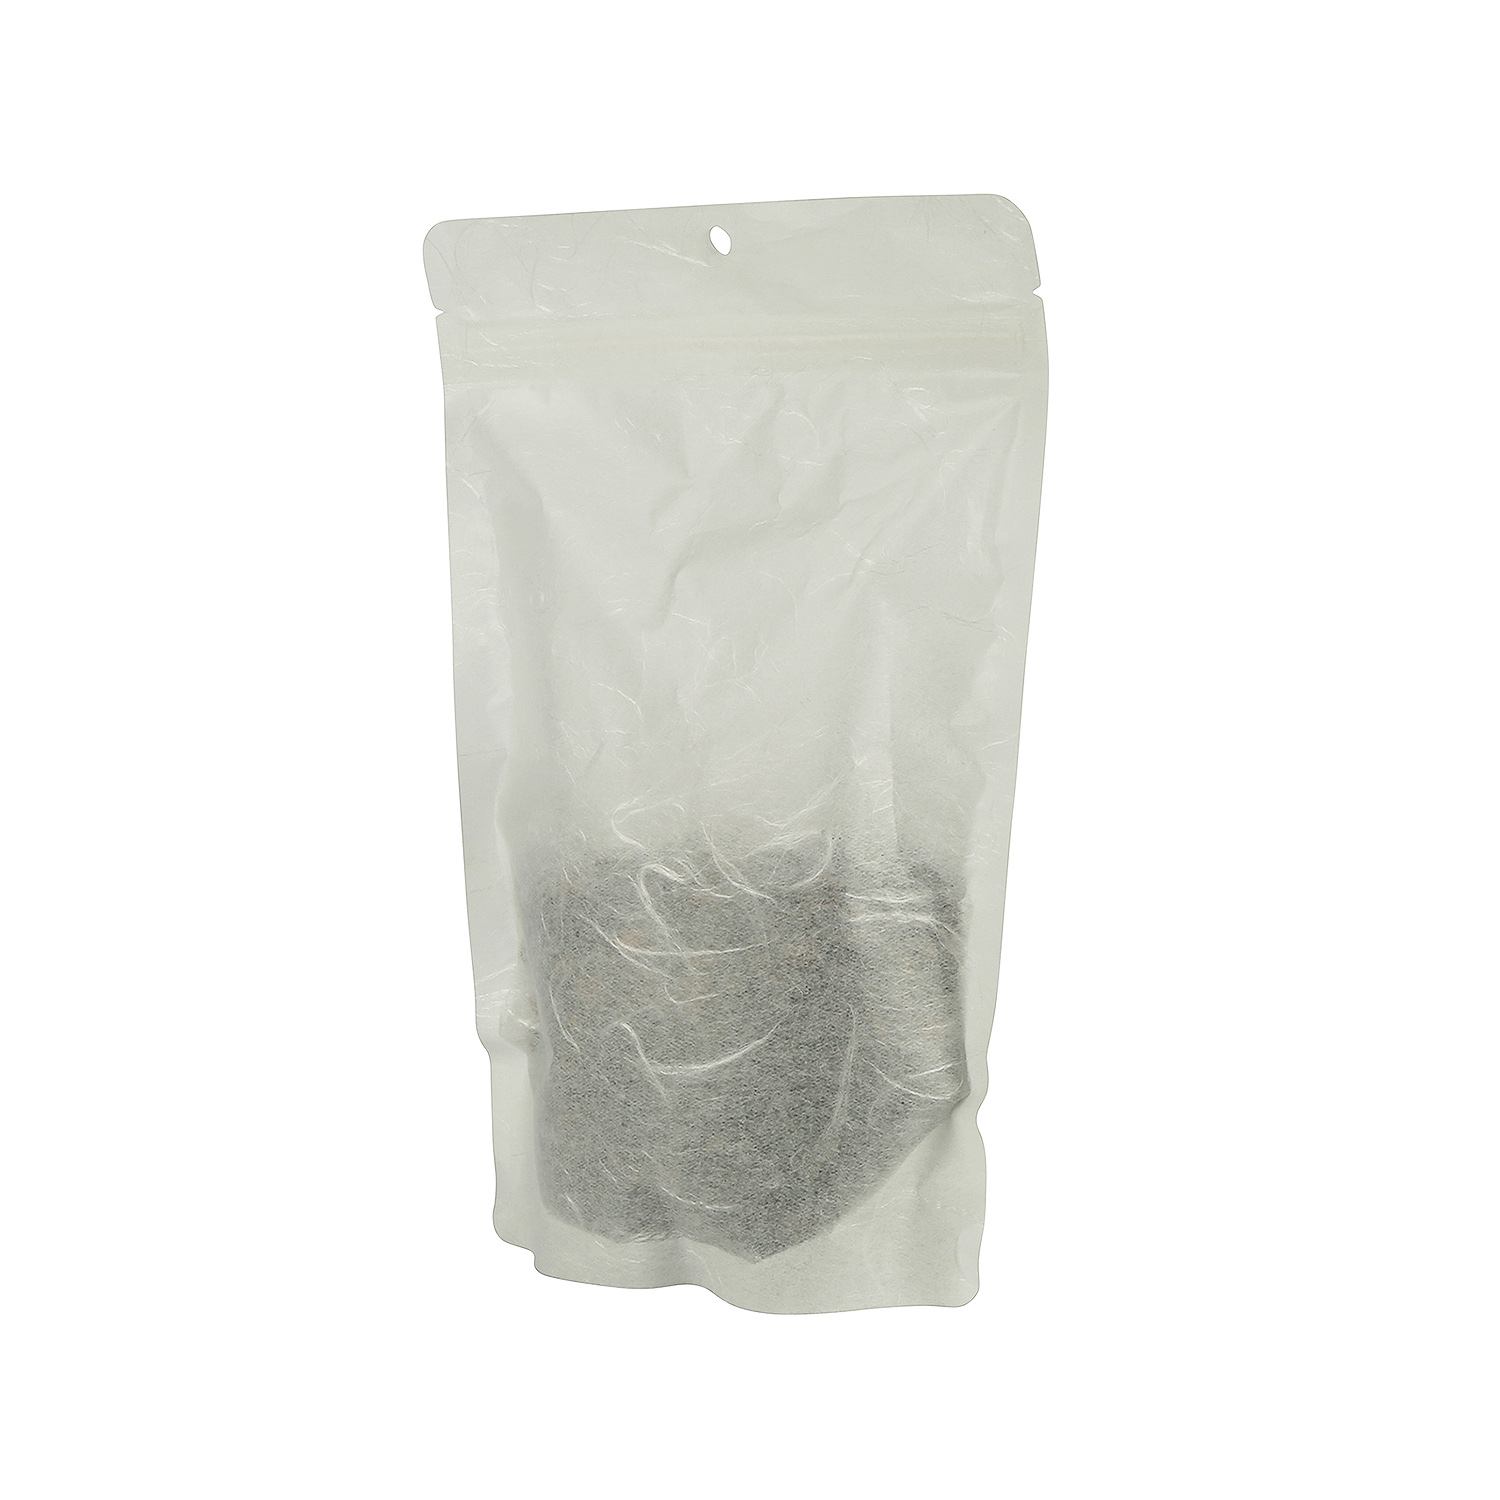 Unprinted Compostable White Rice Paper Backed Stand Up Pouches with Hang Hole & Zipper